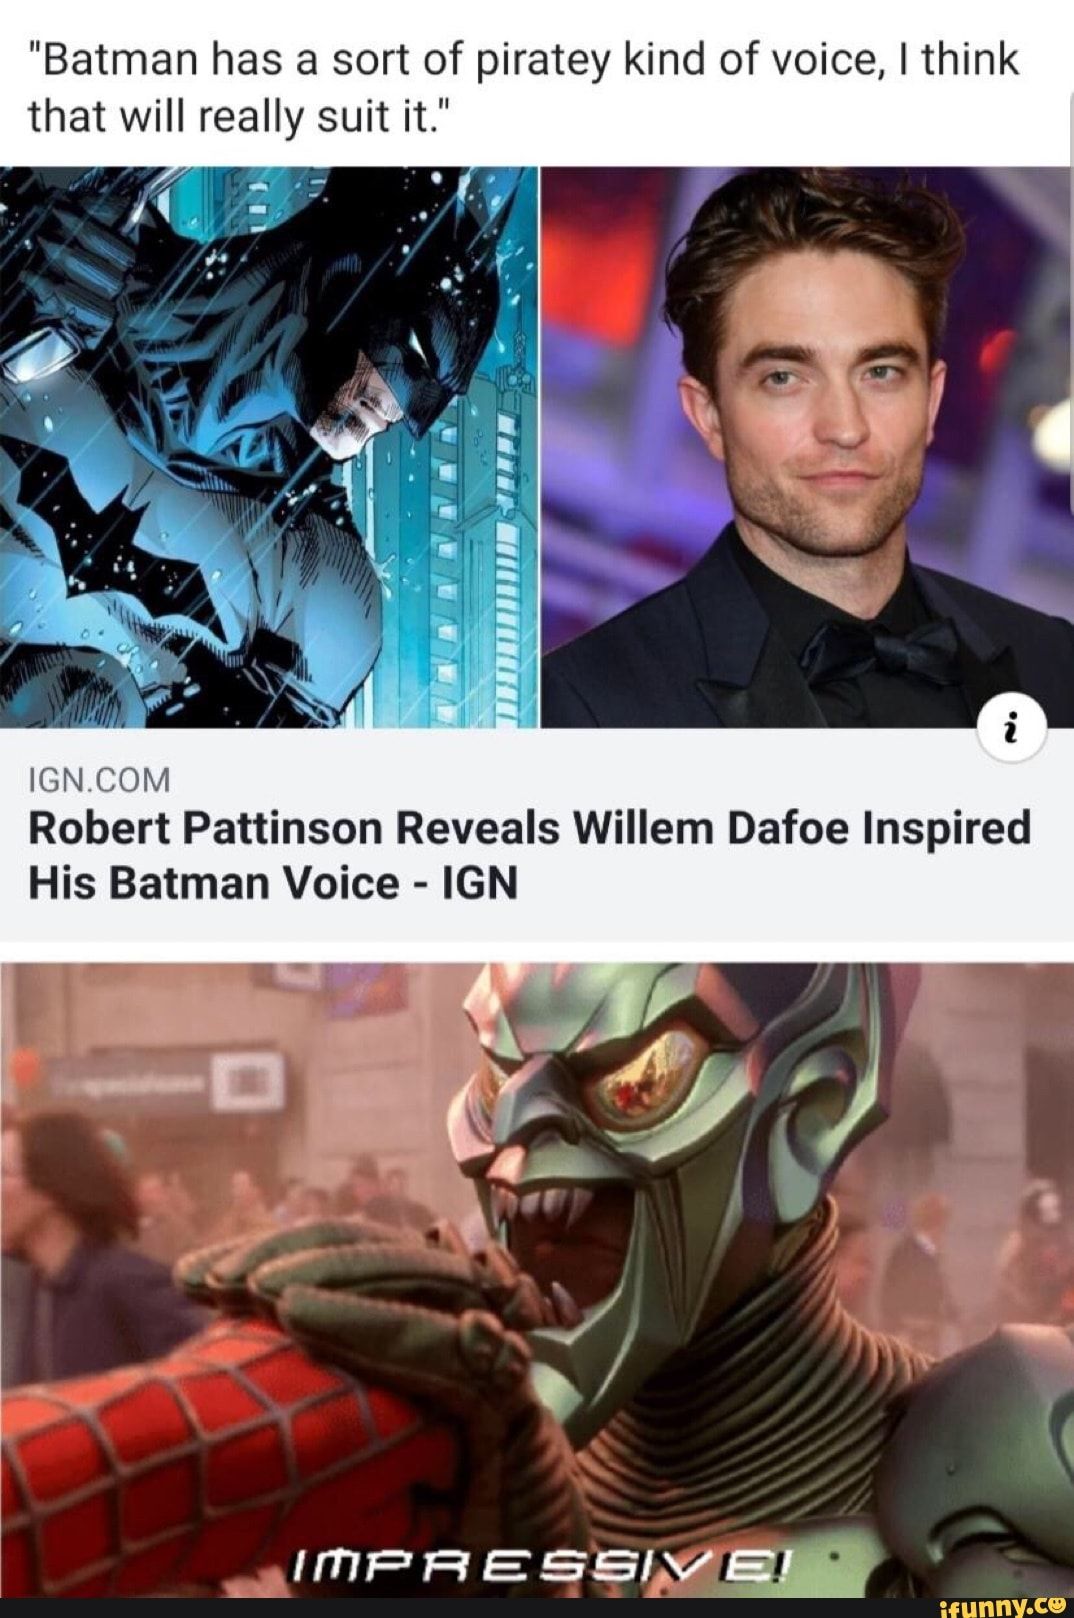 15 Best Memes On Robert Pattinson As Batman That Are Very Funny